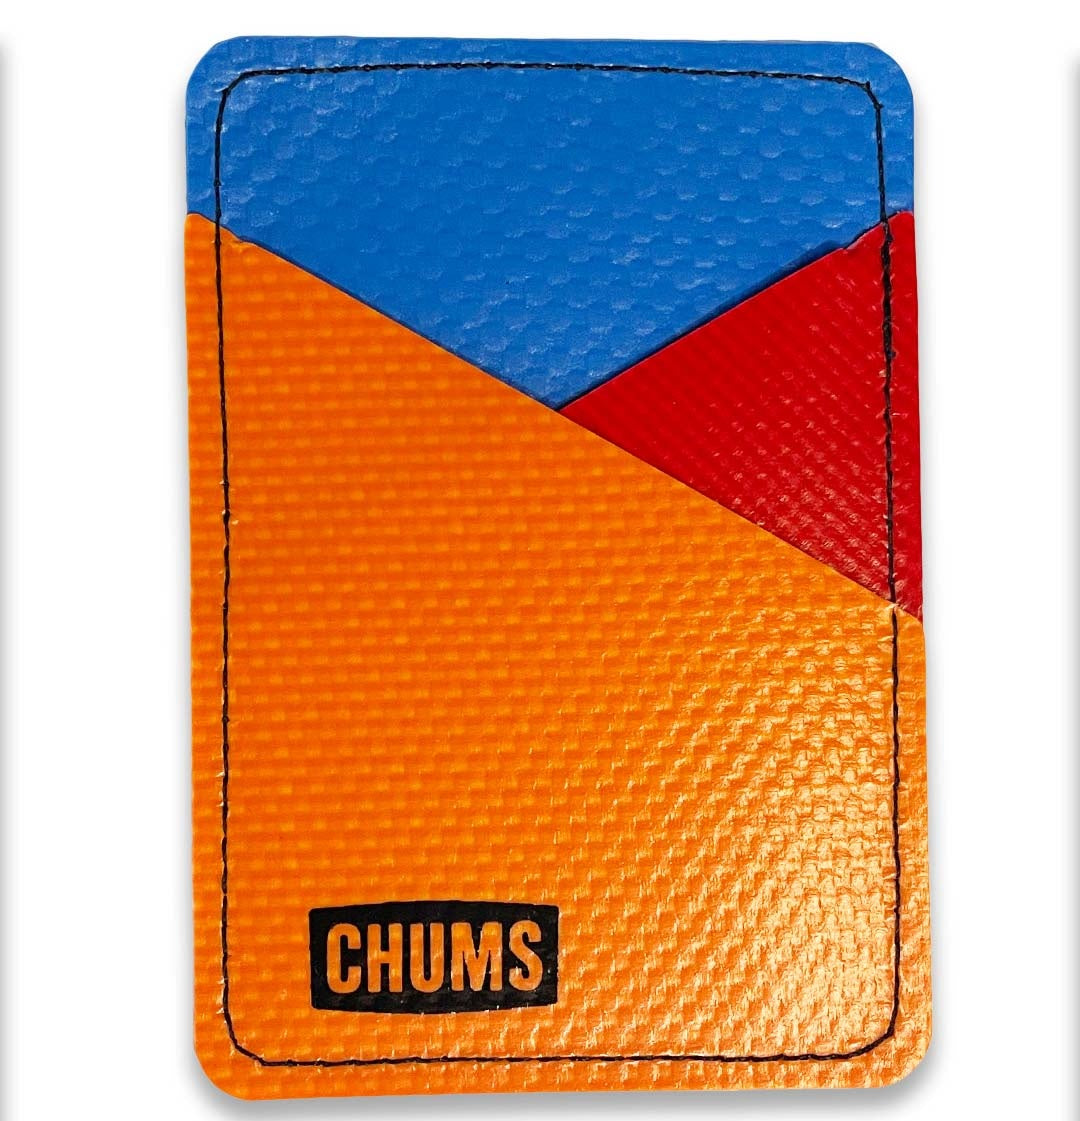 Chums - Duckie Wallet